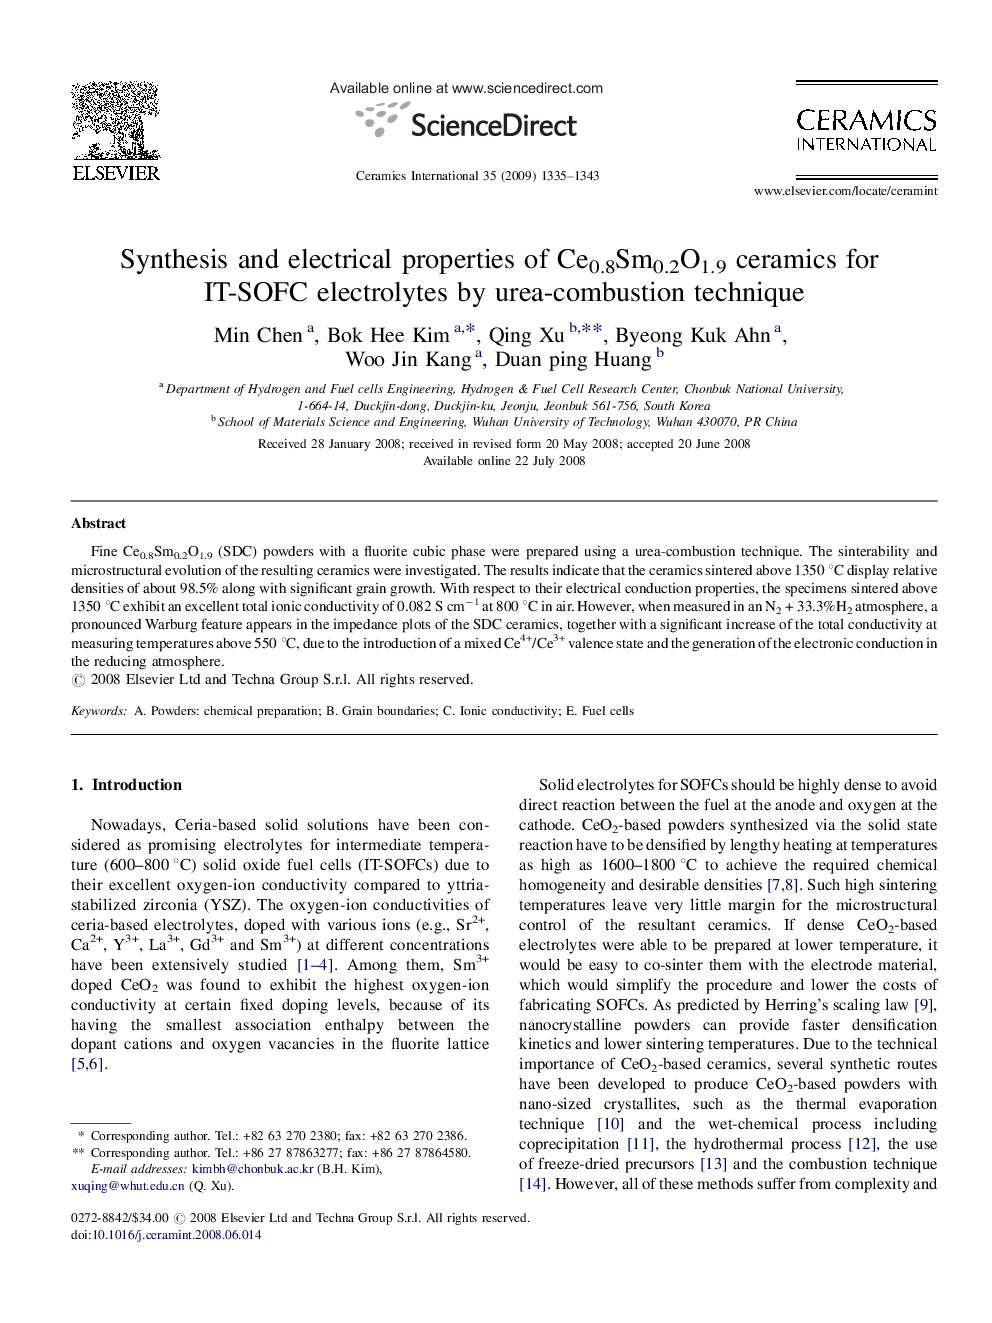 Synthesis and electrical properties of Ce0.8Sm0.2O1.9 ceramics for IT-SOFC electrolytes by urea-combustion technique